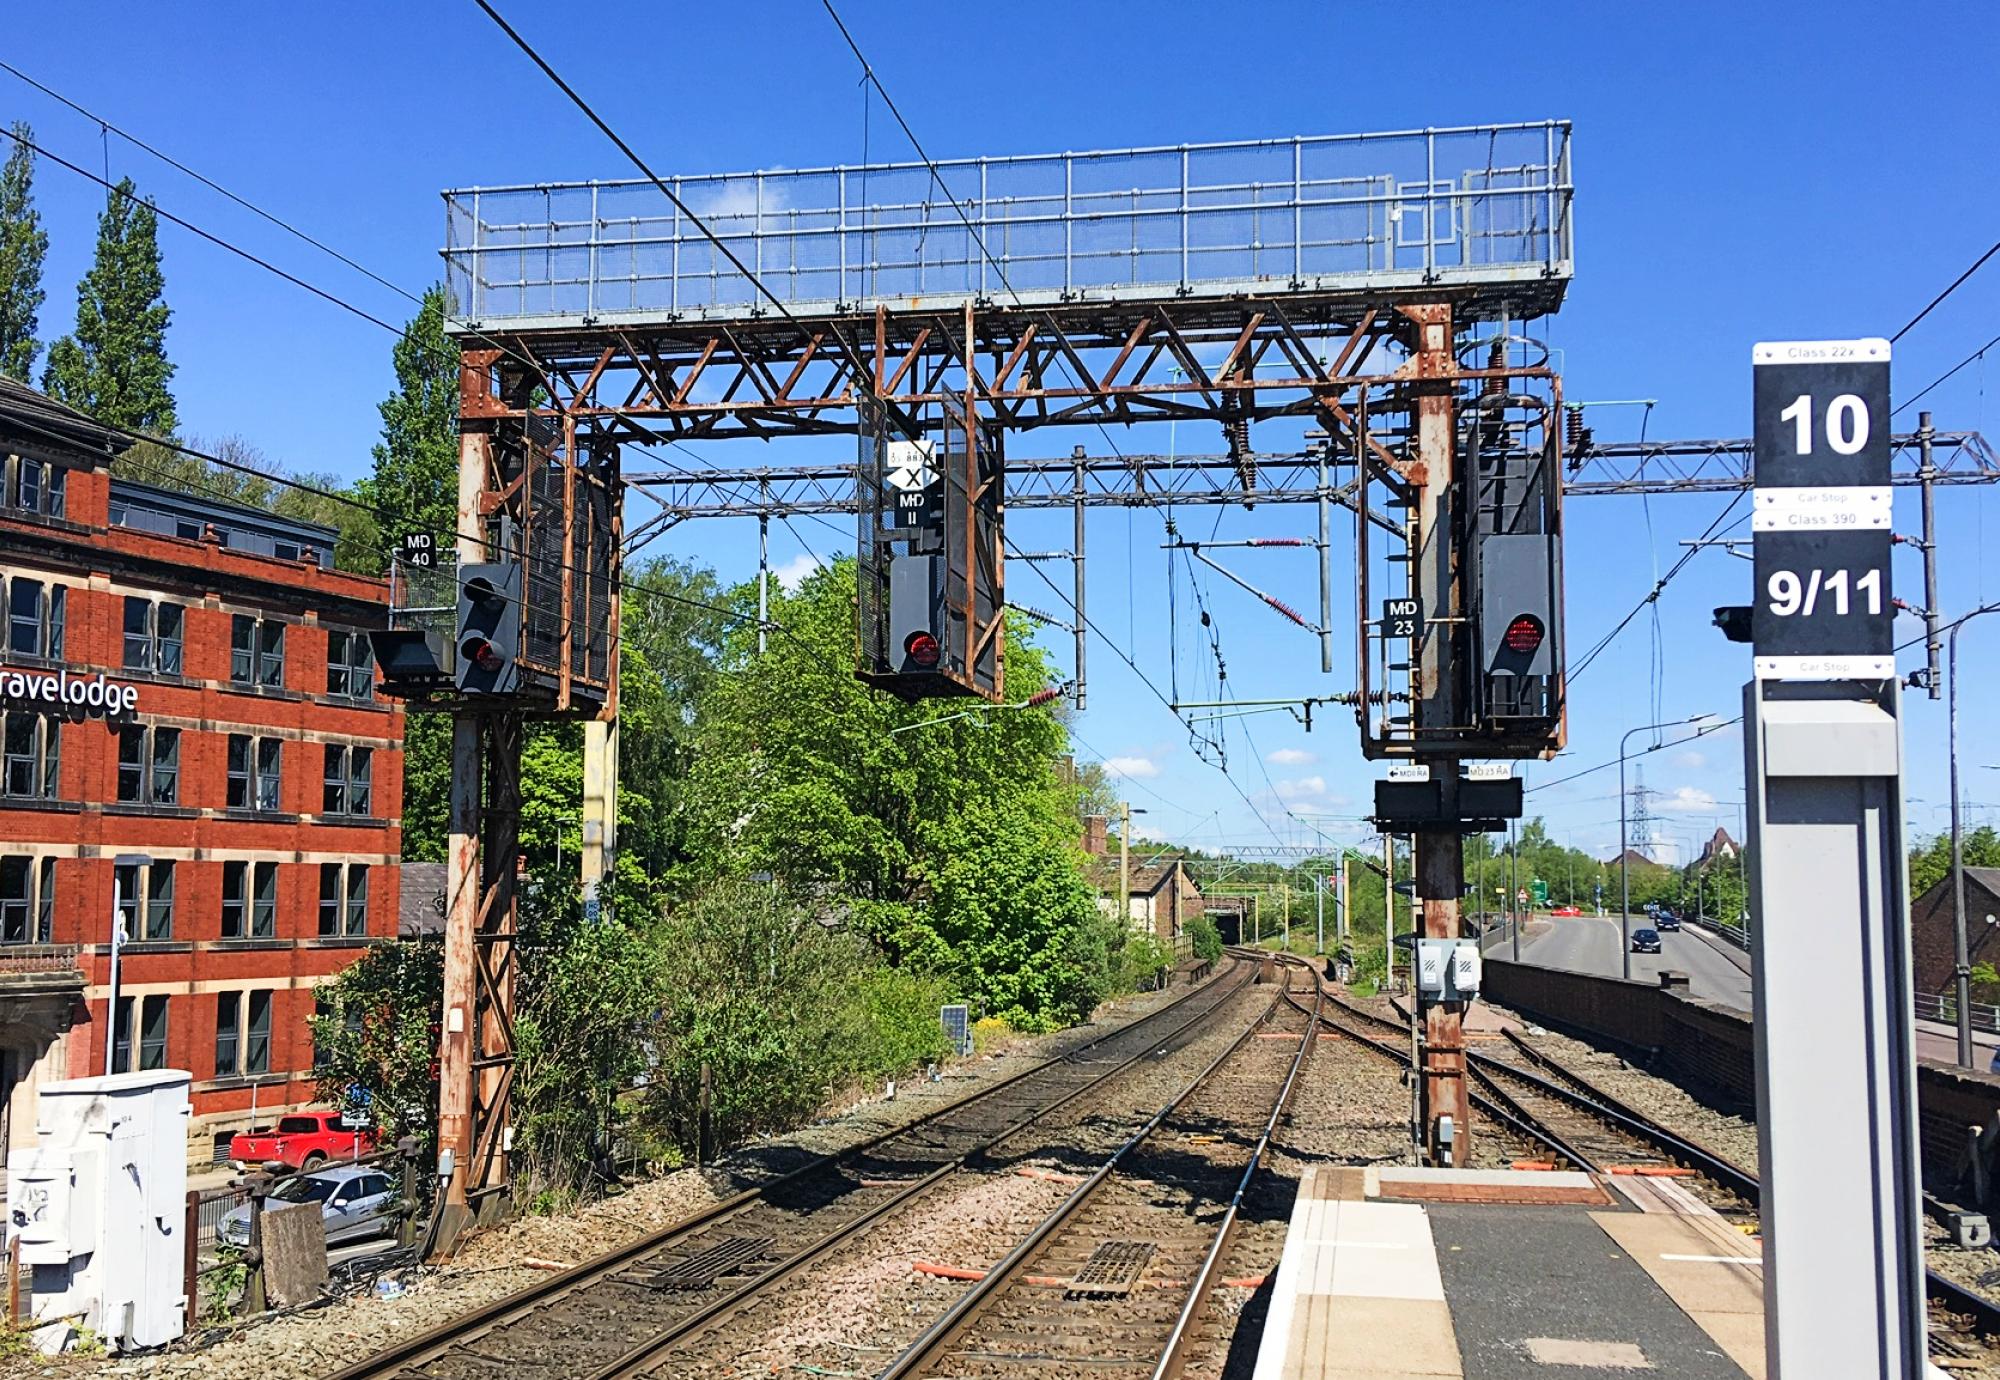 Signals on the West Coast Main Line